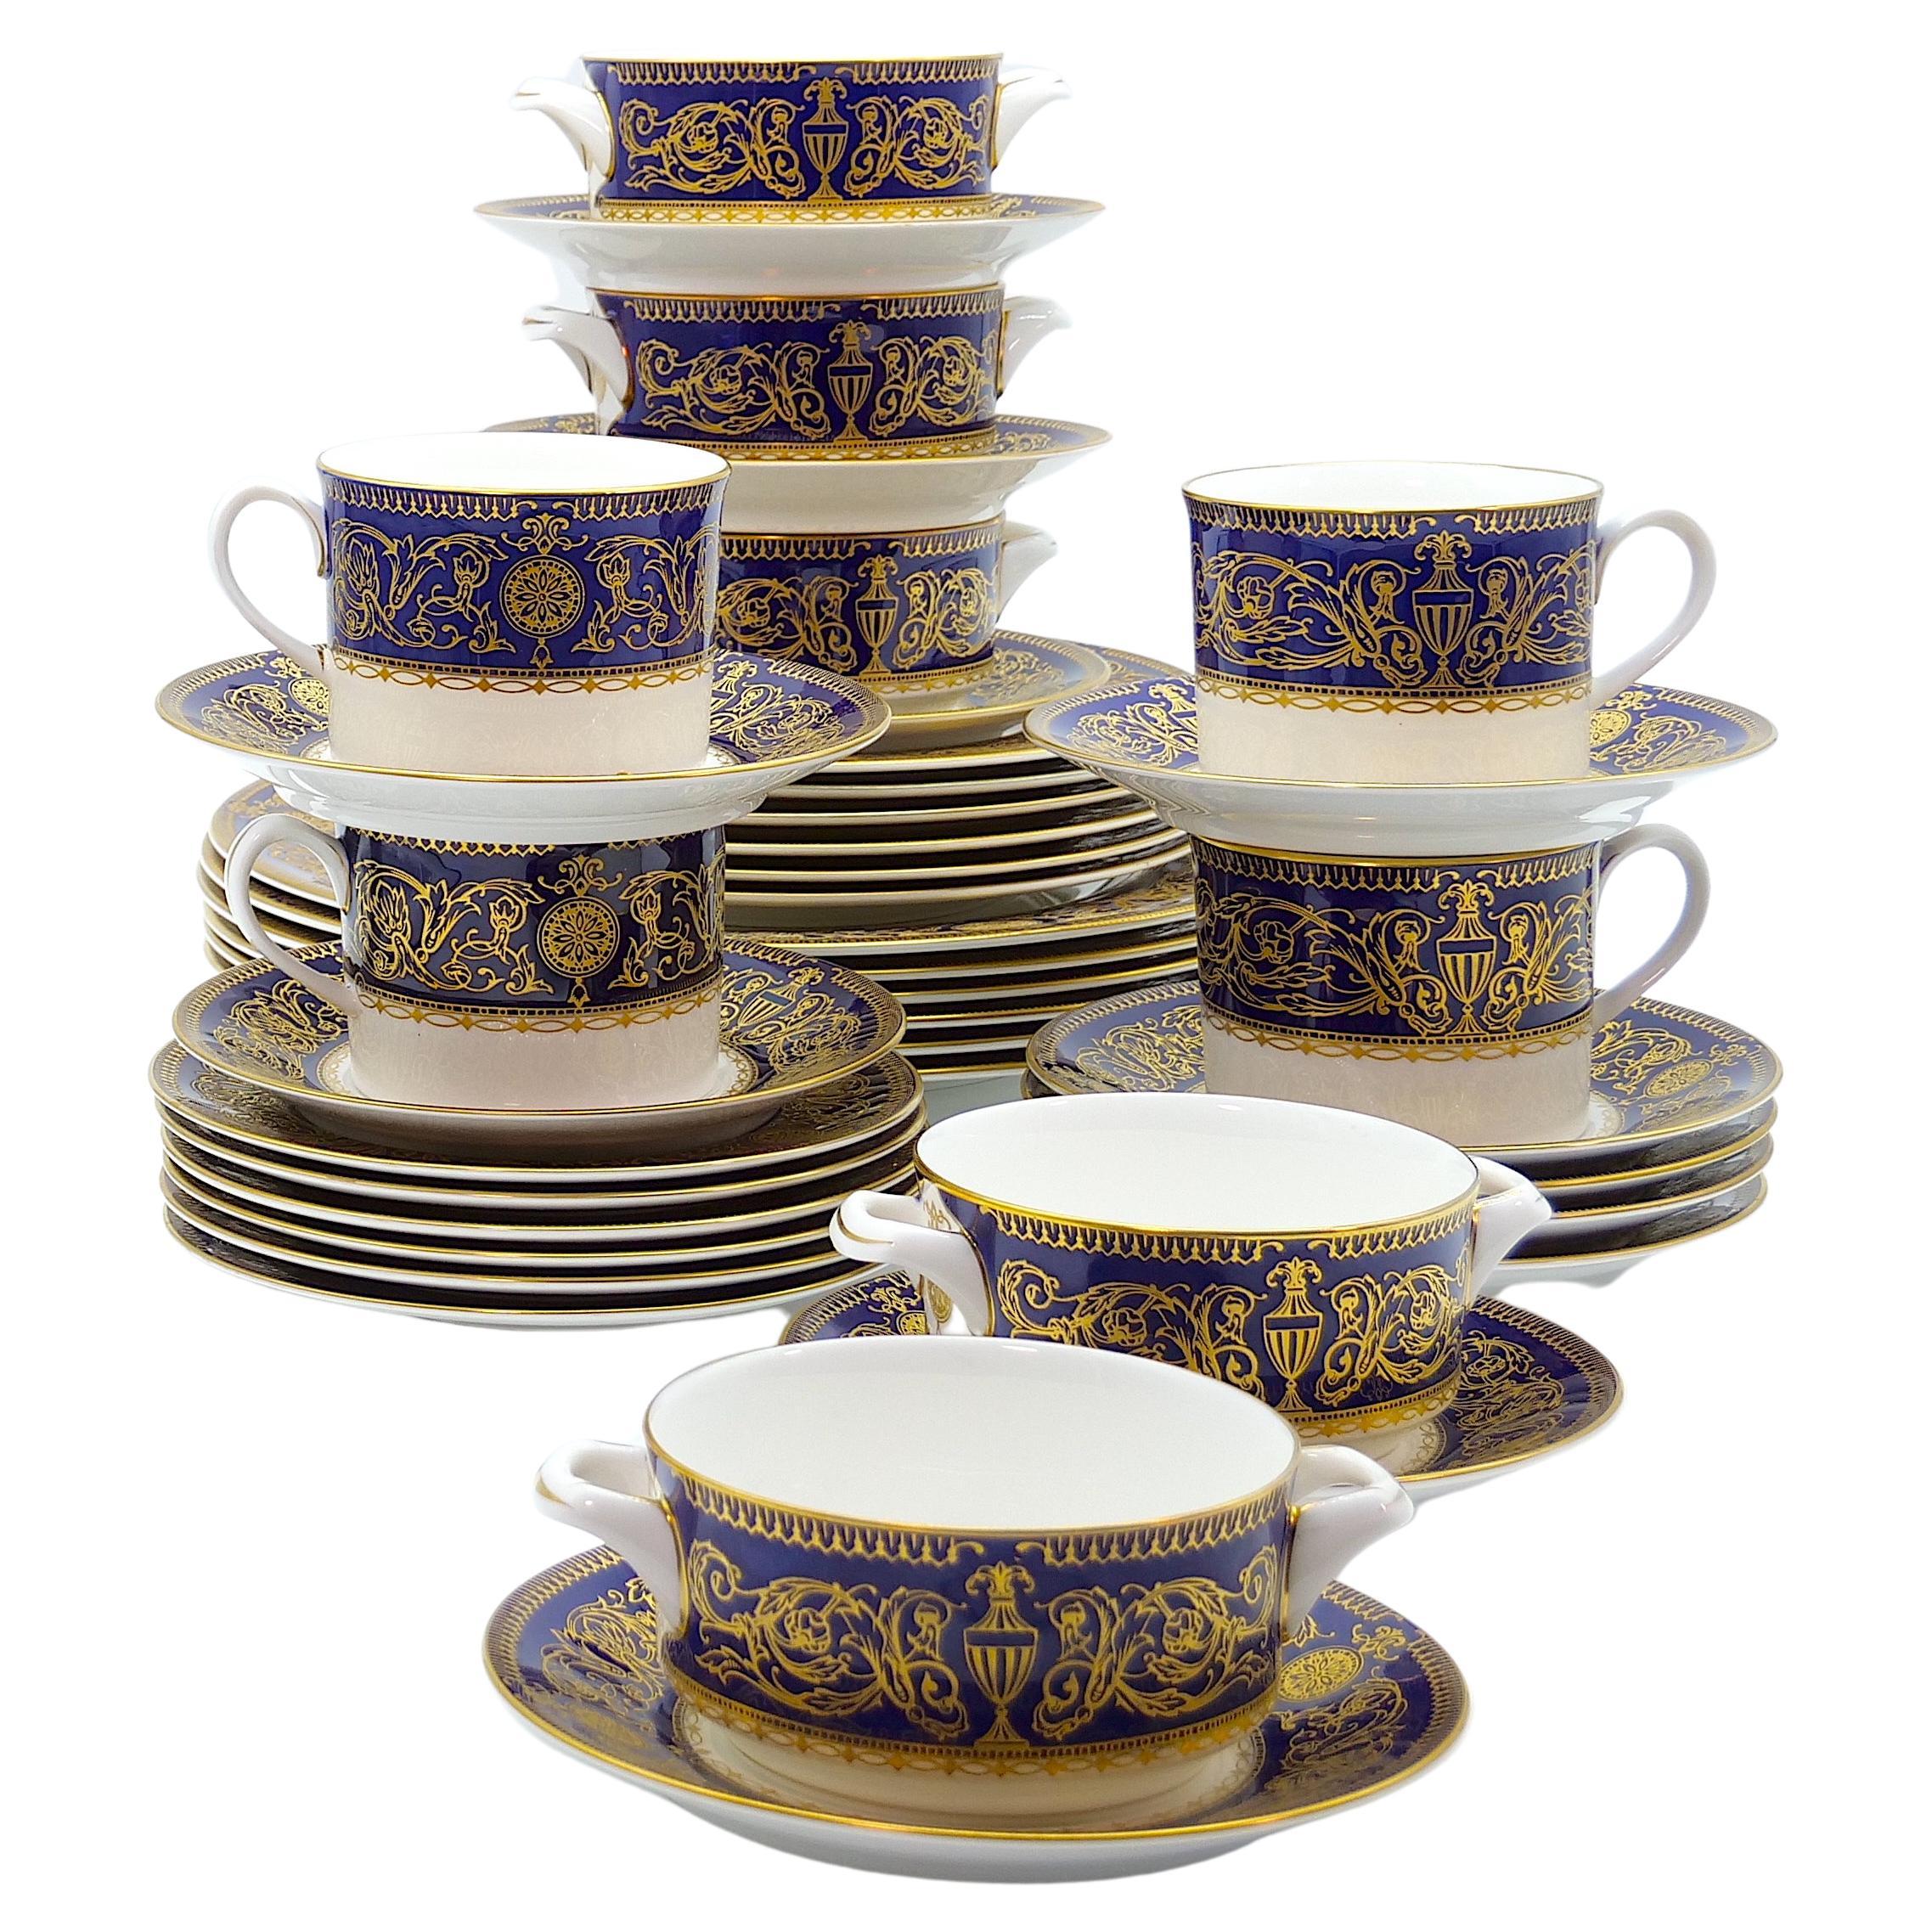 English Porcelain & Gilt Dinner Service For 12 People/ Serving Pieces 1